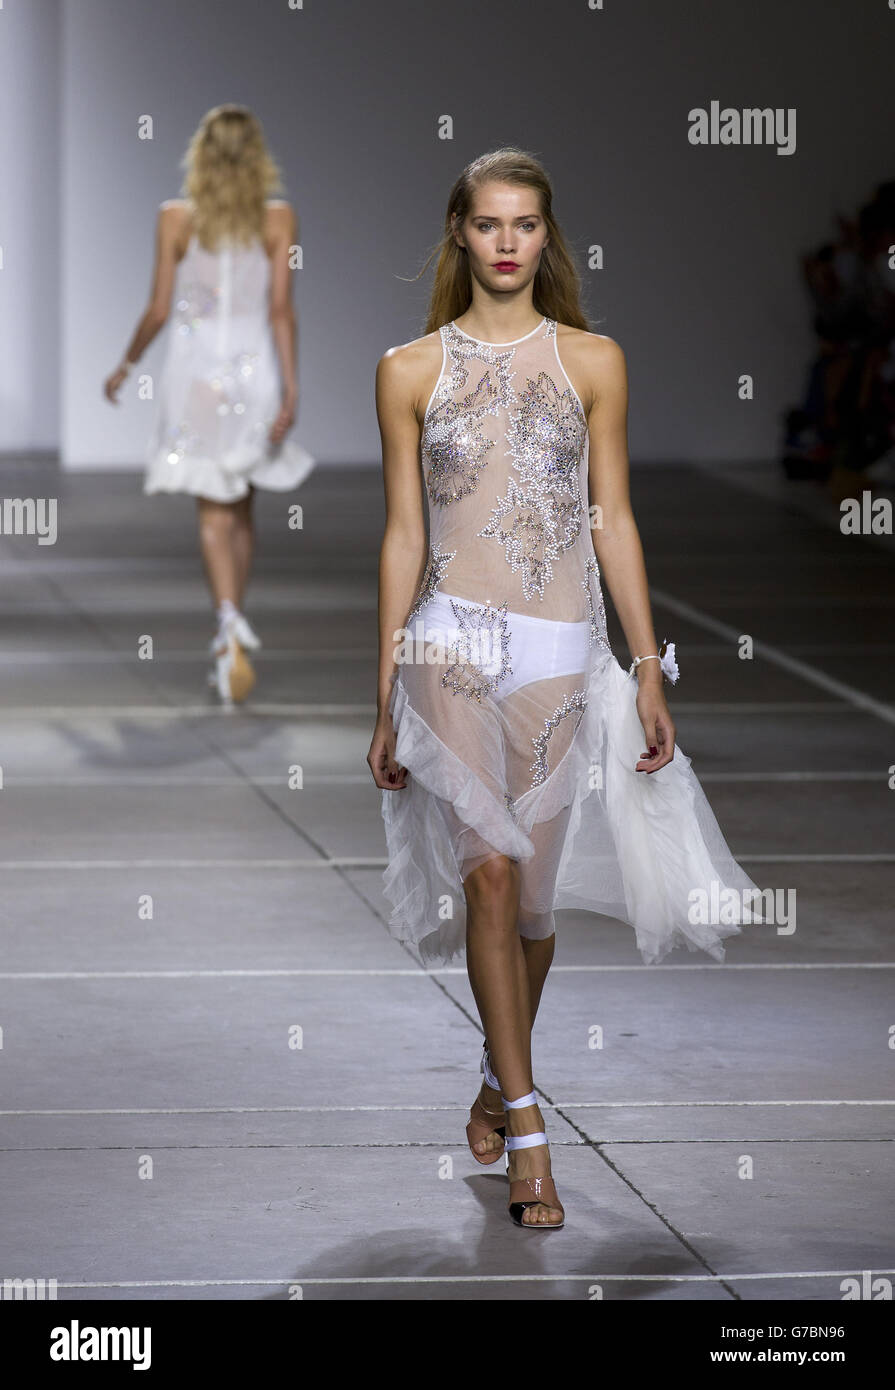 Models on the catwalk at the Topshop Show Space in London during London Fashion Week. Stock Photo